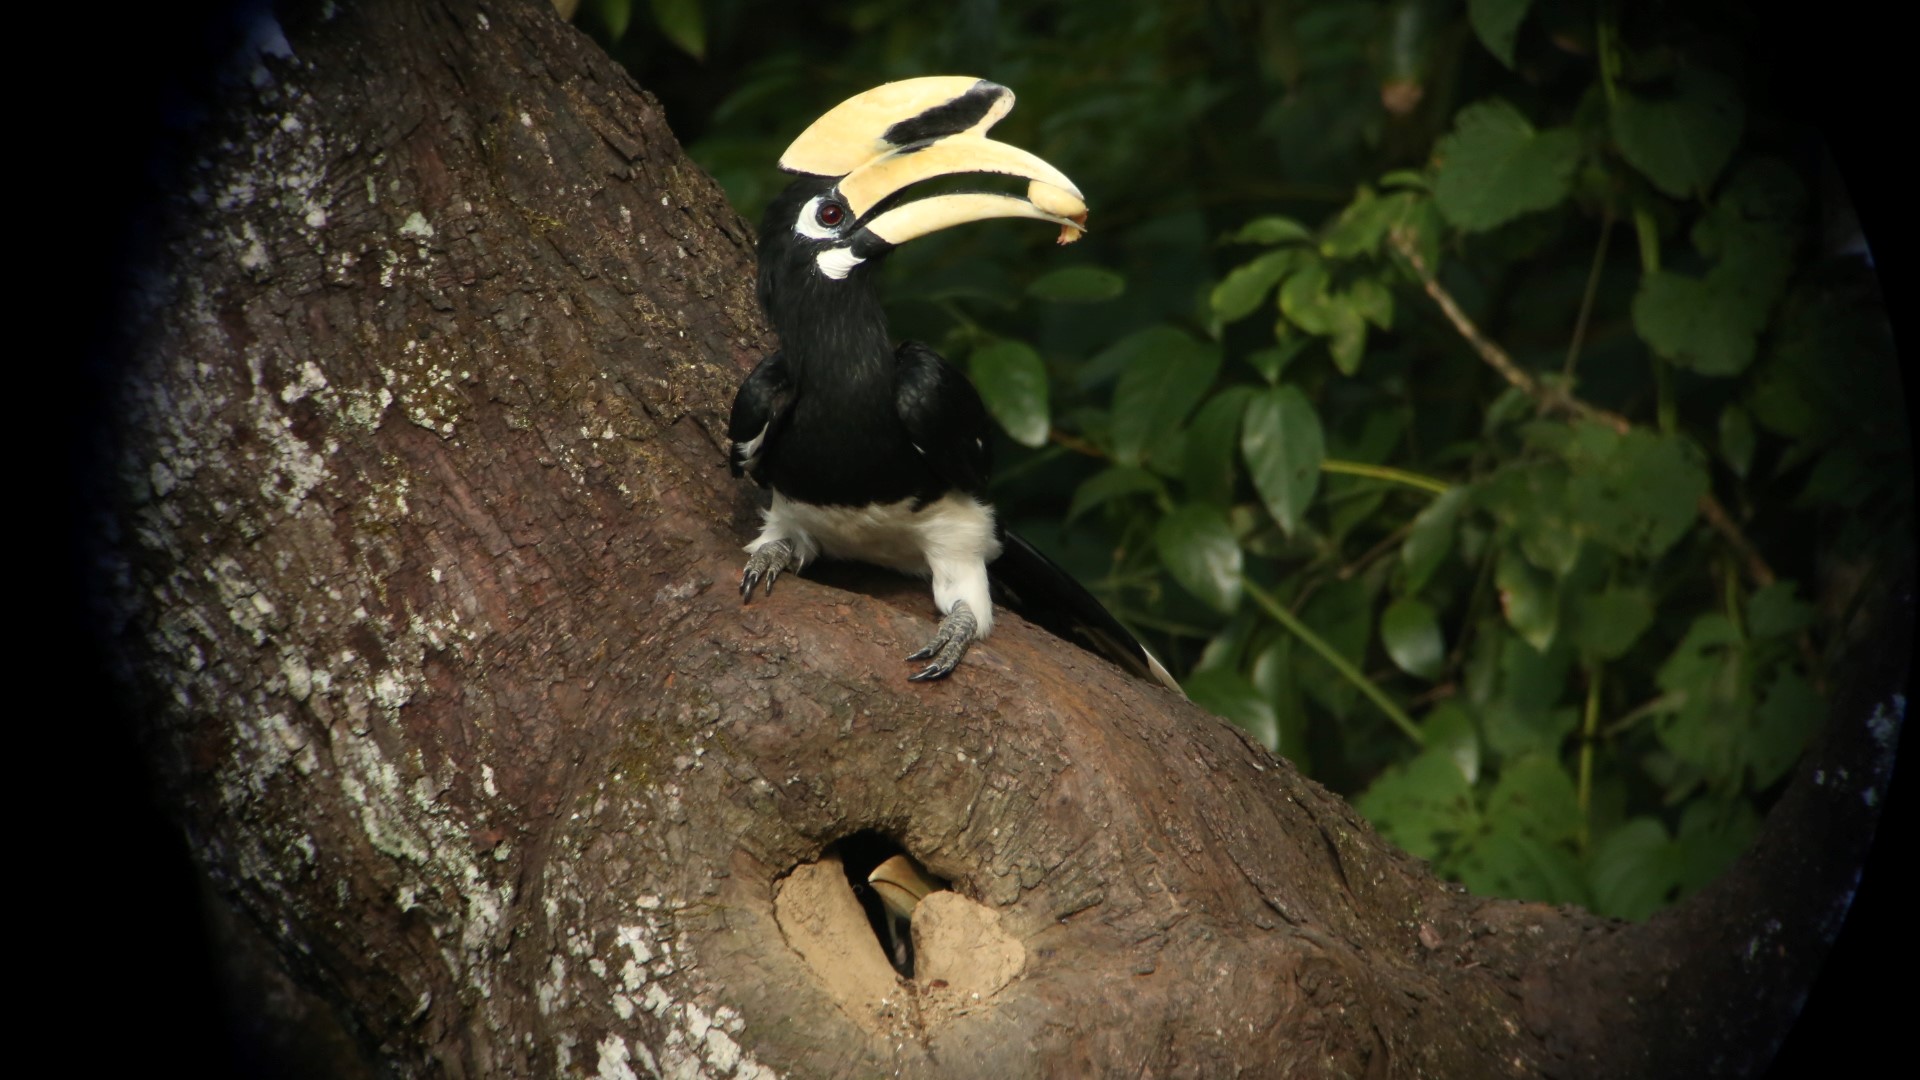 The star of the show is this father hornbill.